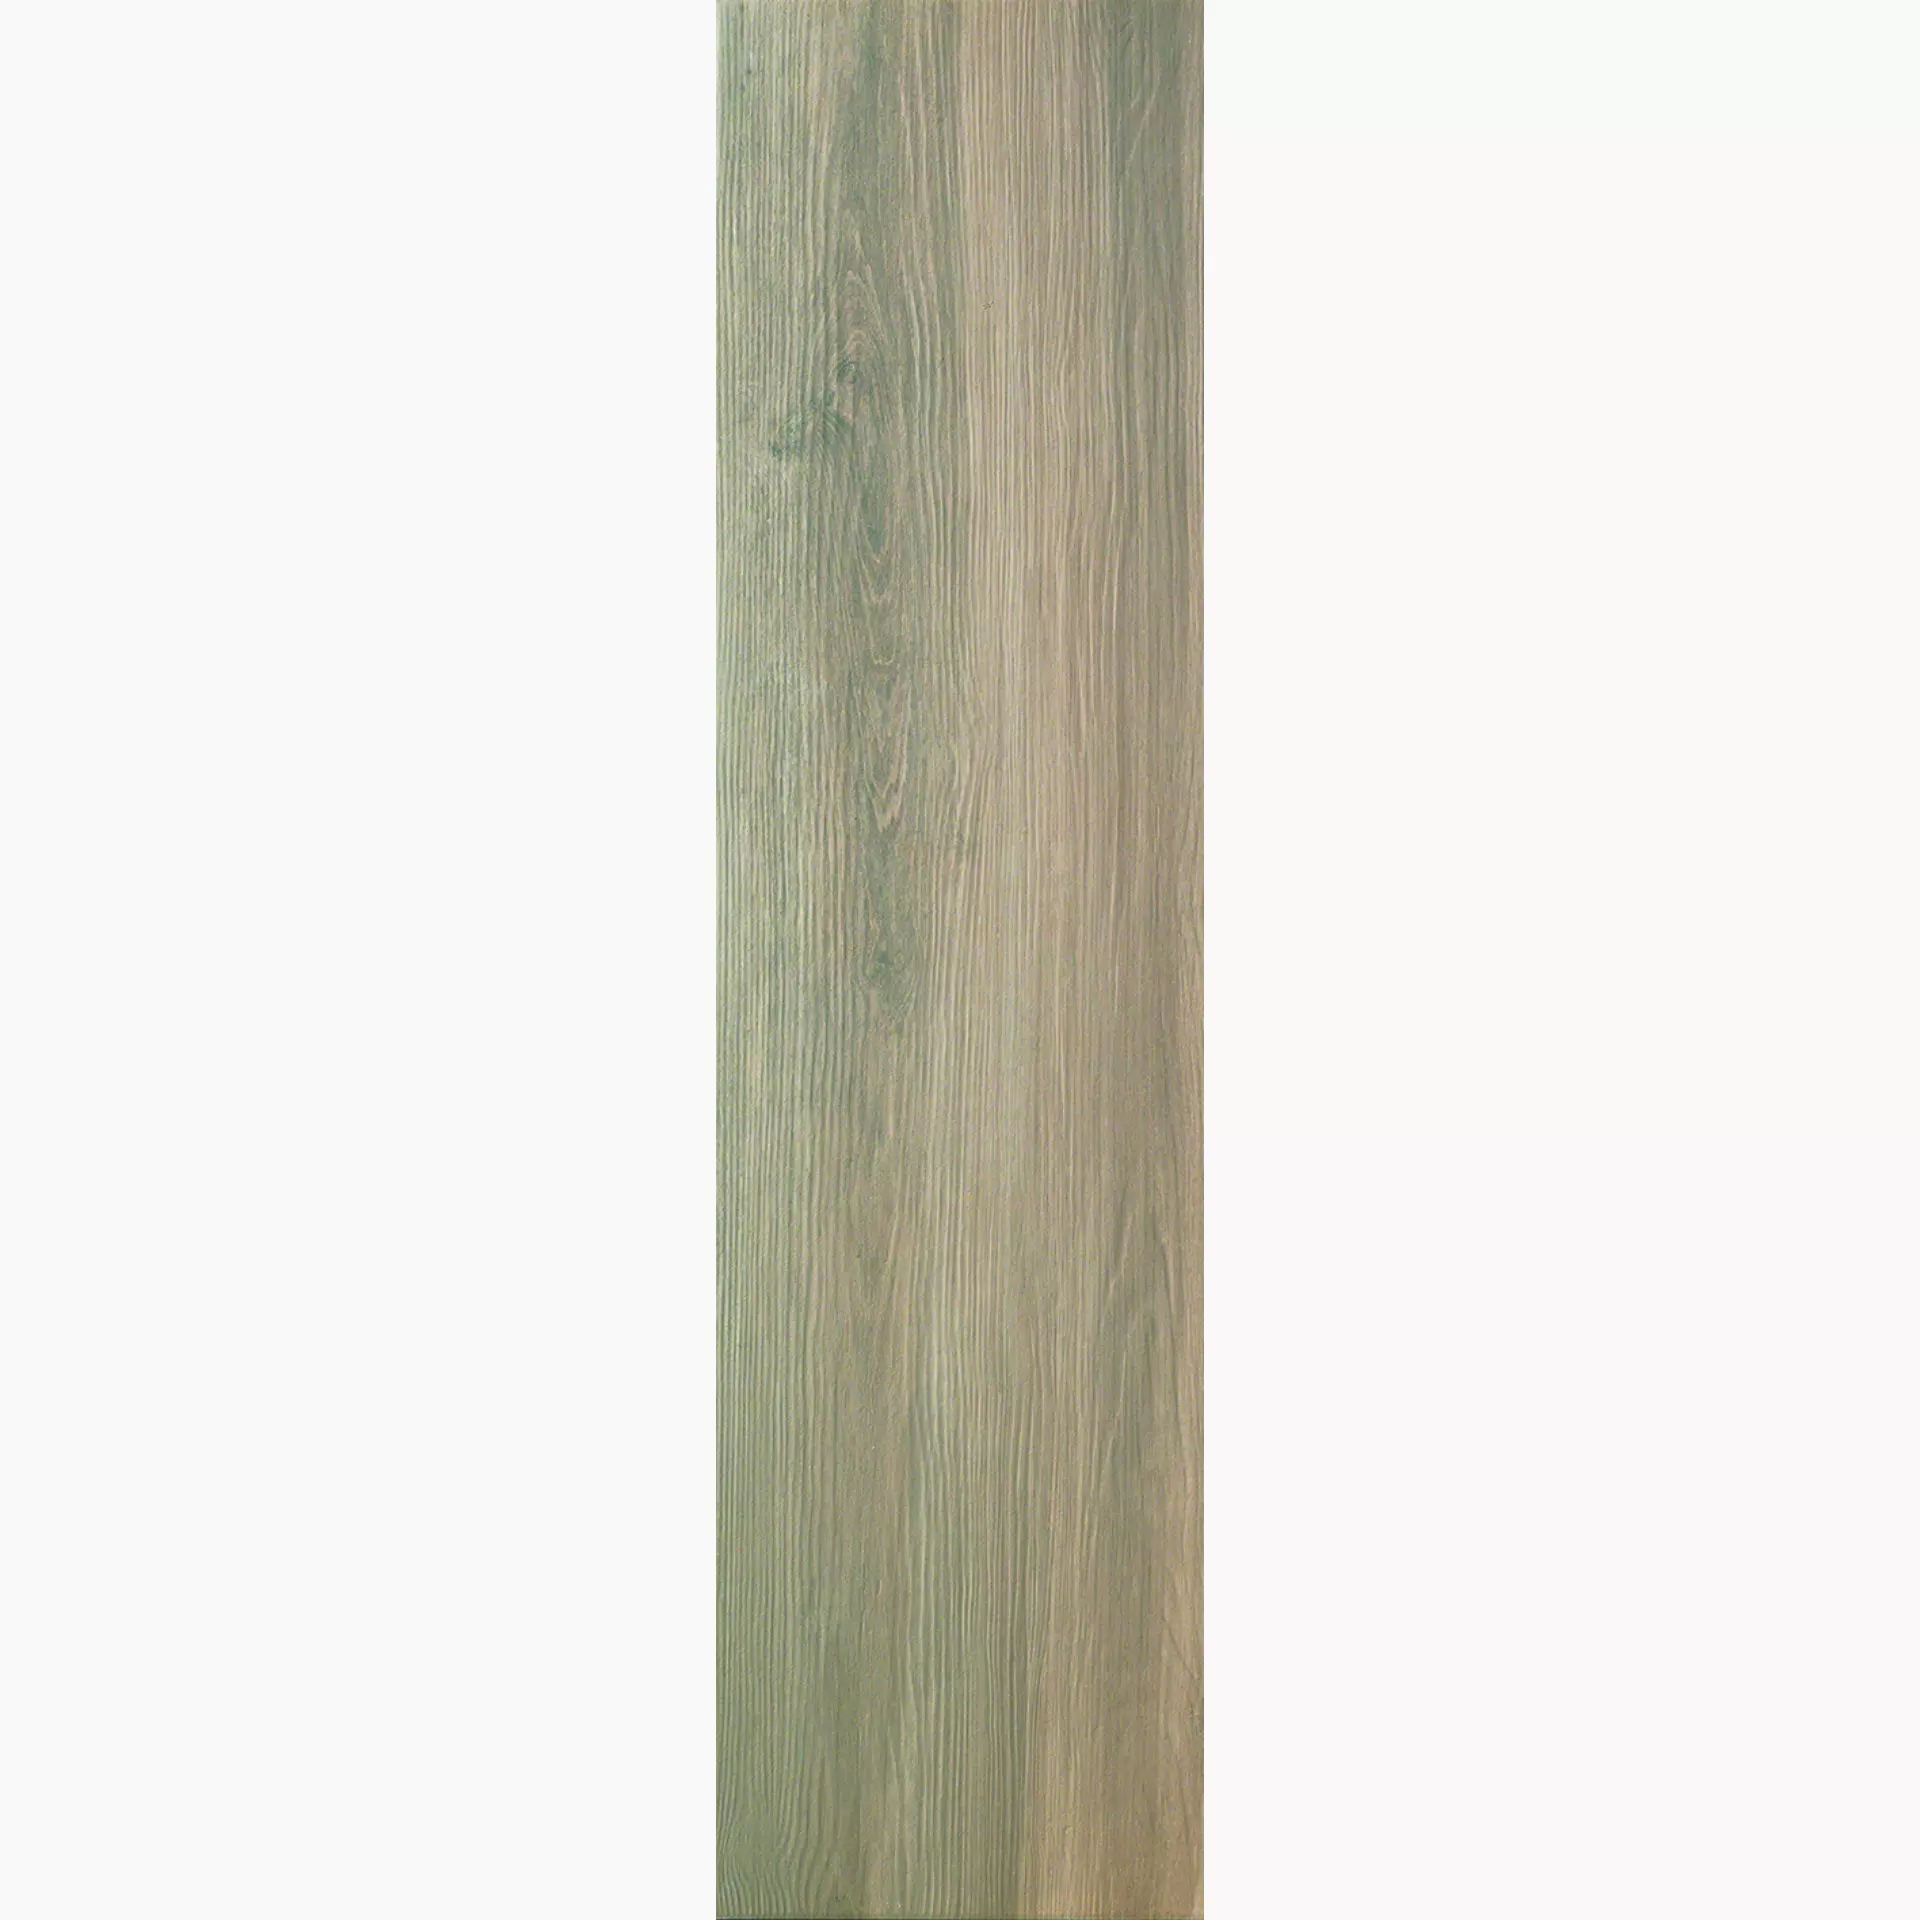 Serenissima Acanto Rovere Naturale 1047710 30x120cm rectified 9,5mm